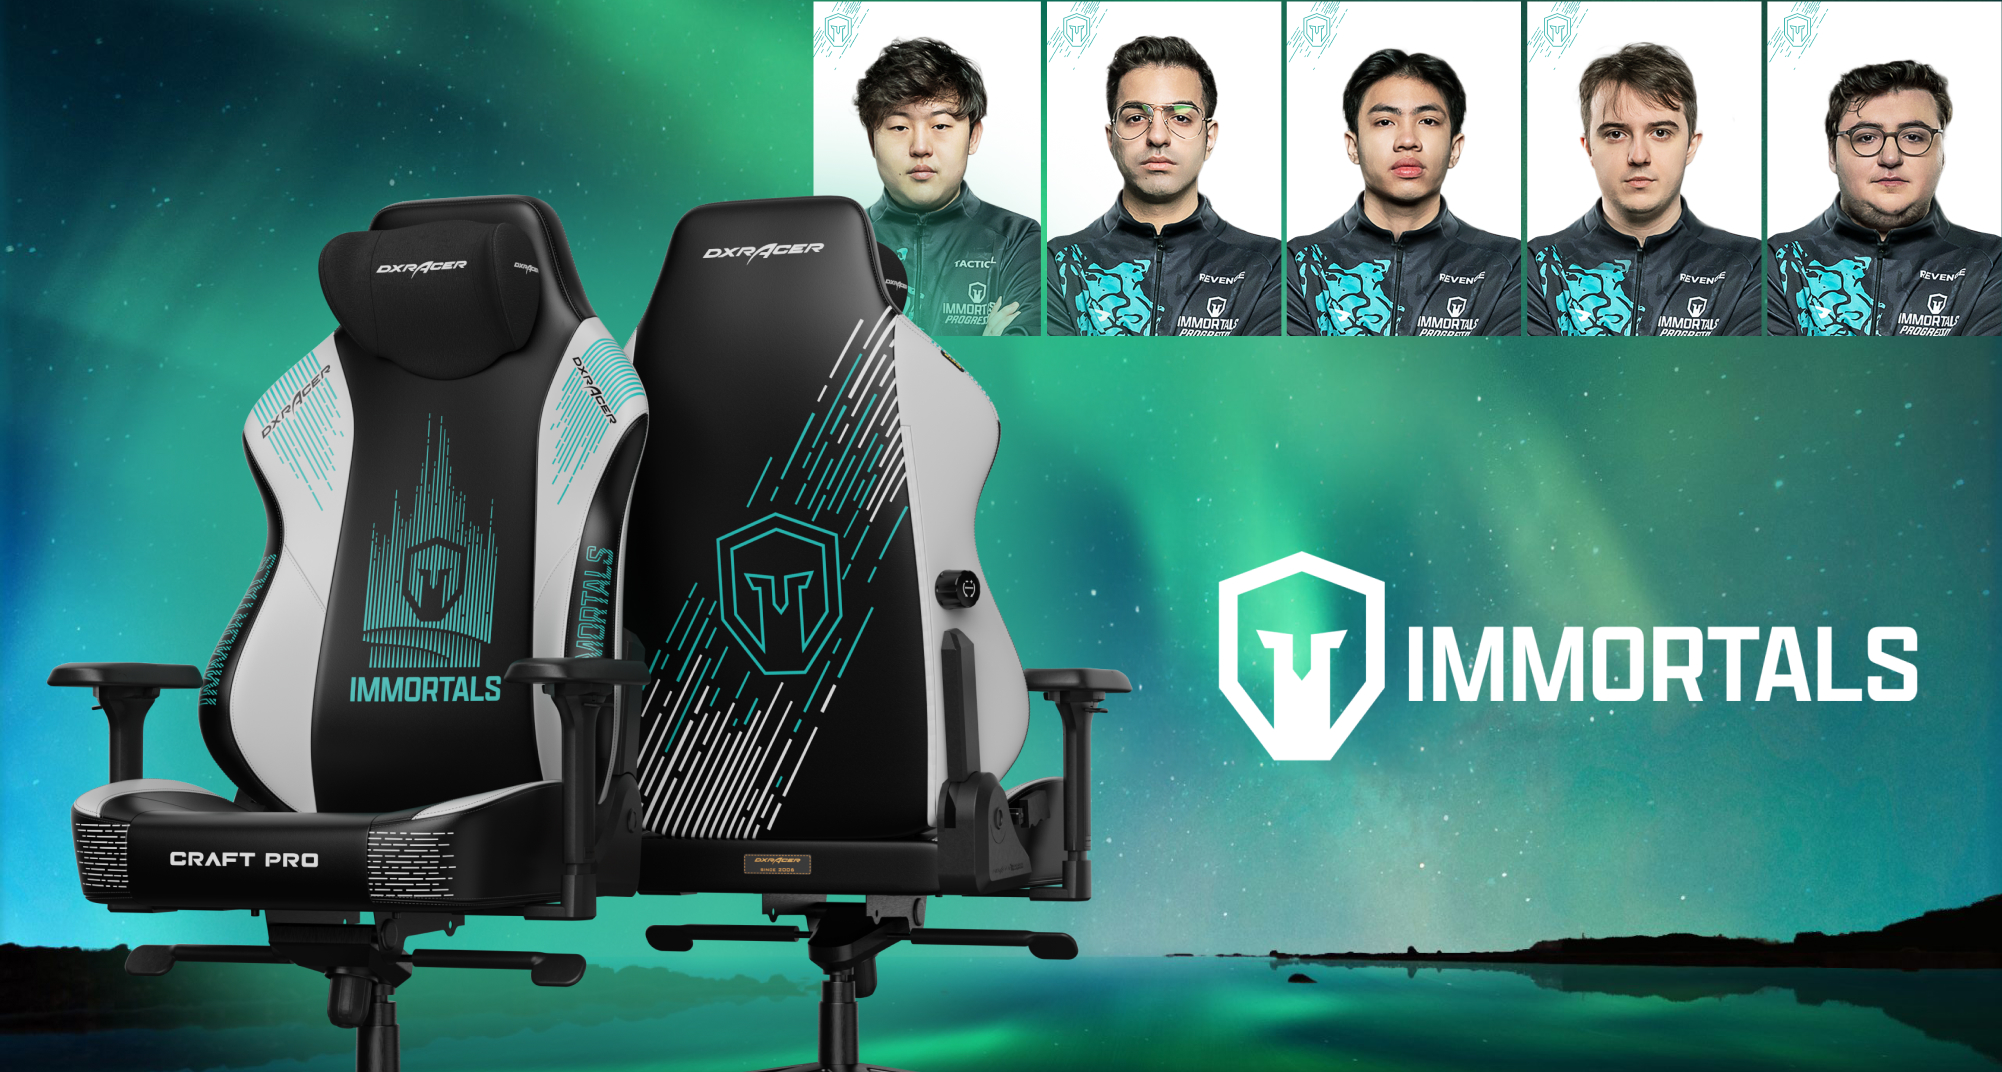 Immortals Gaming Chair